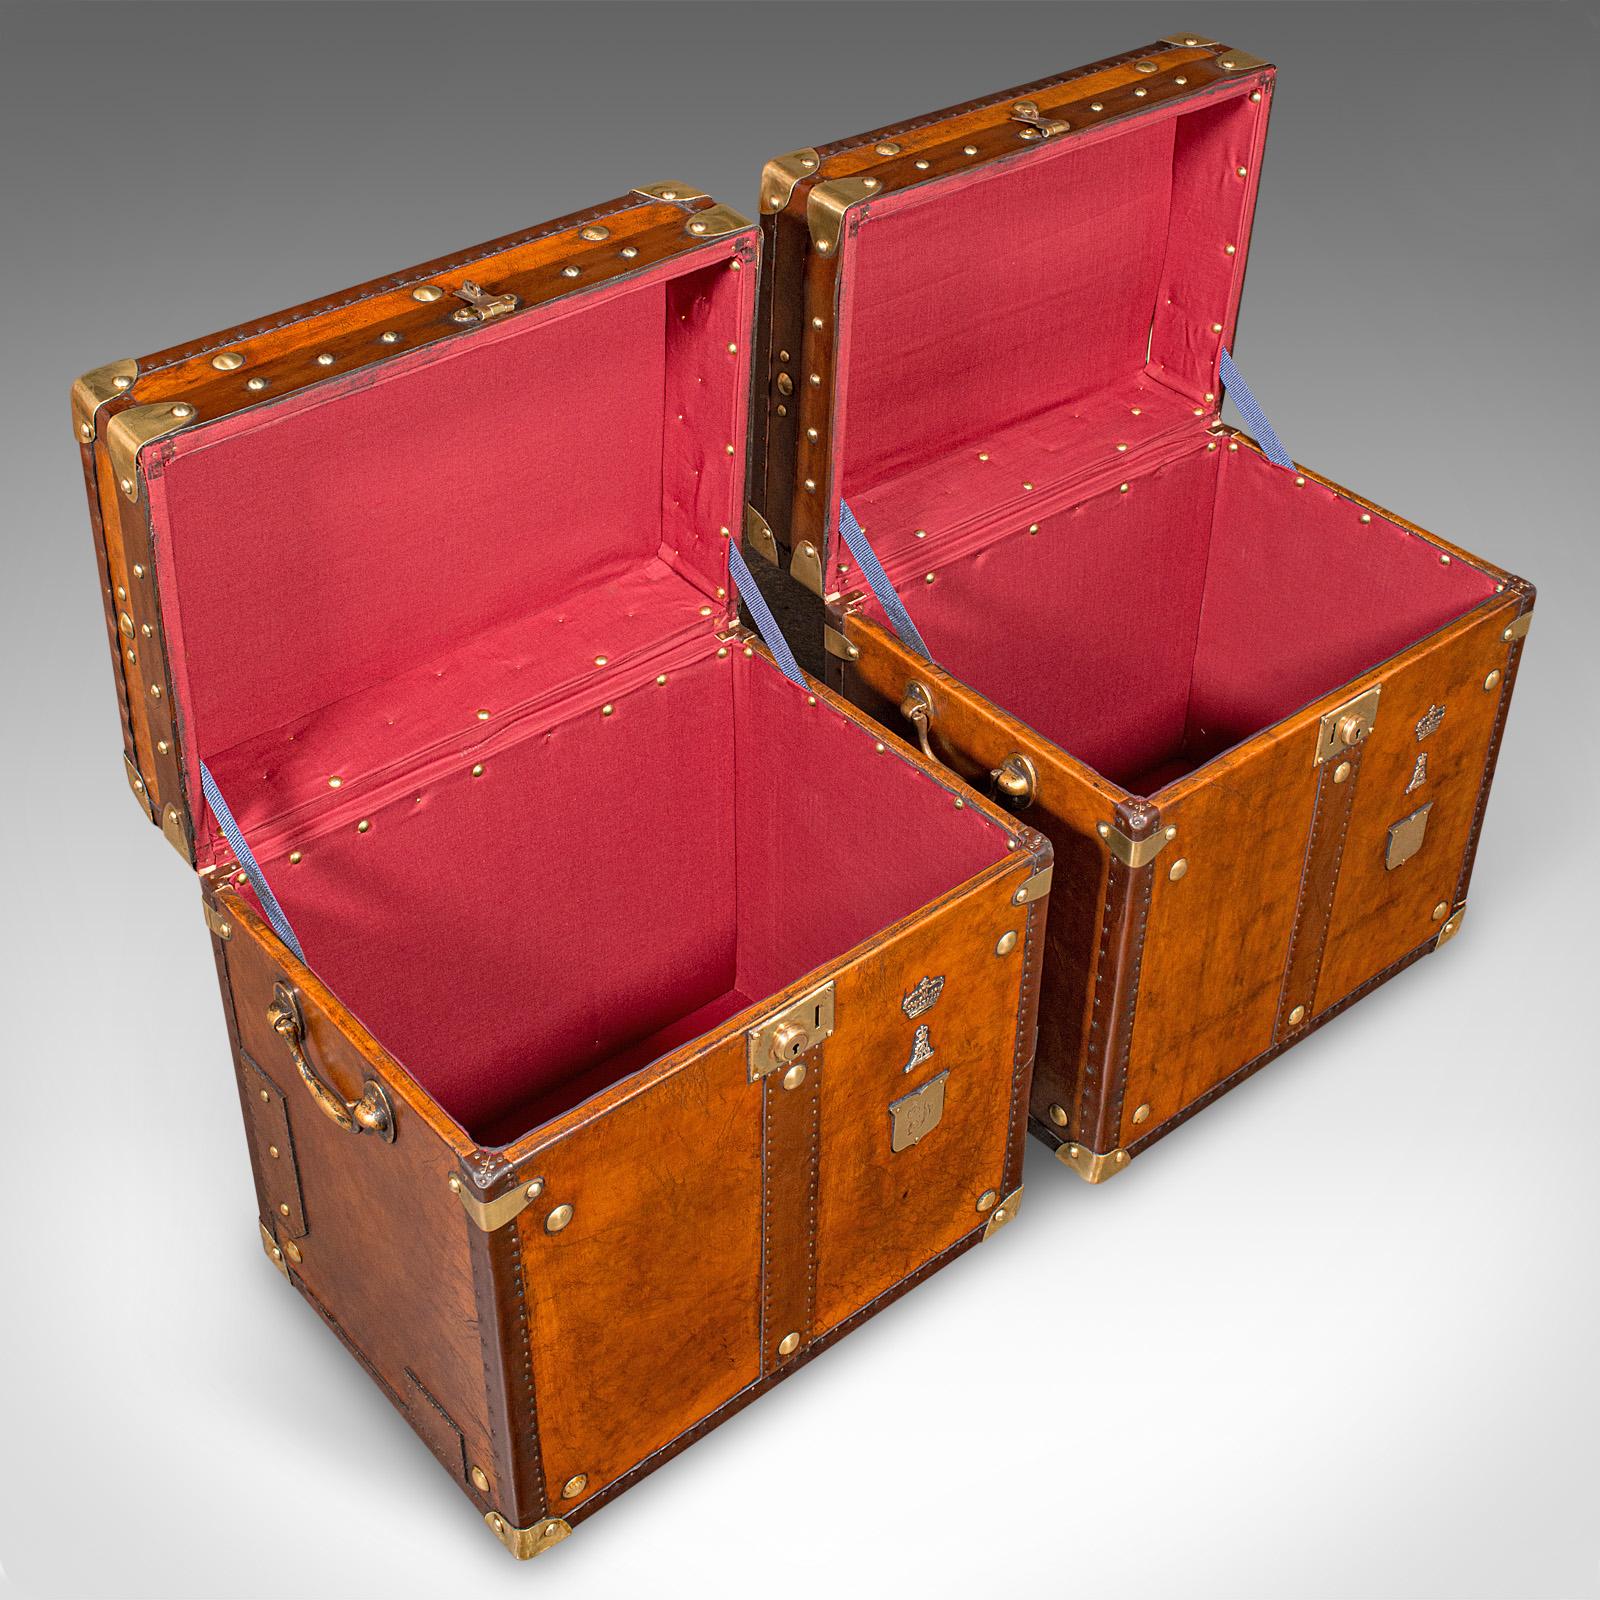 Pair Of Vintage Campaign Luggage Cases, English, Leather, Bedroom Nightstands 2